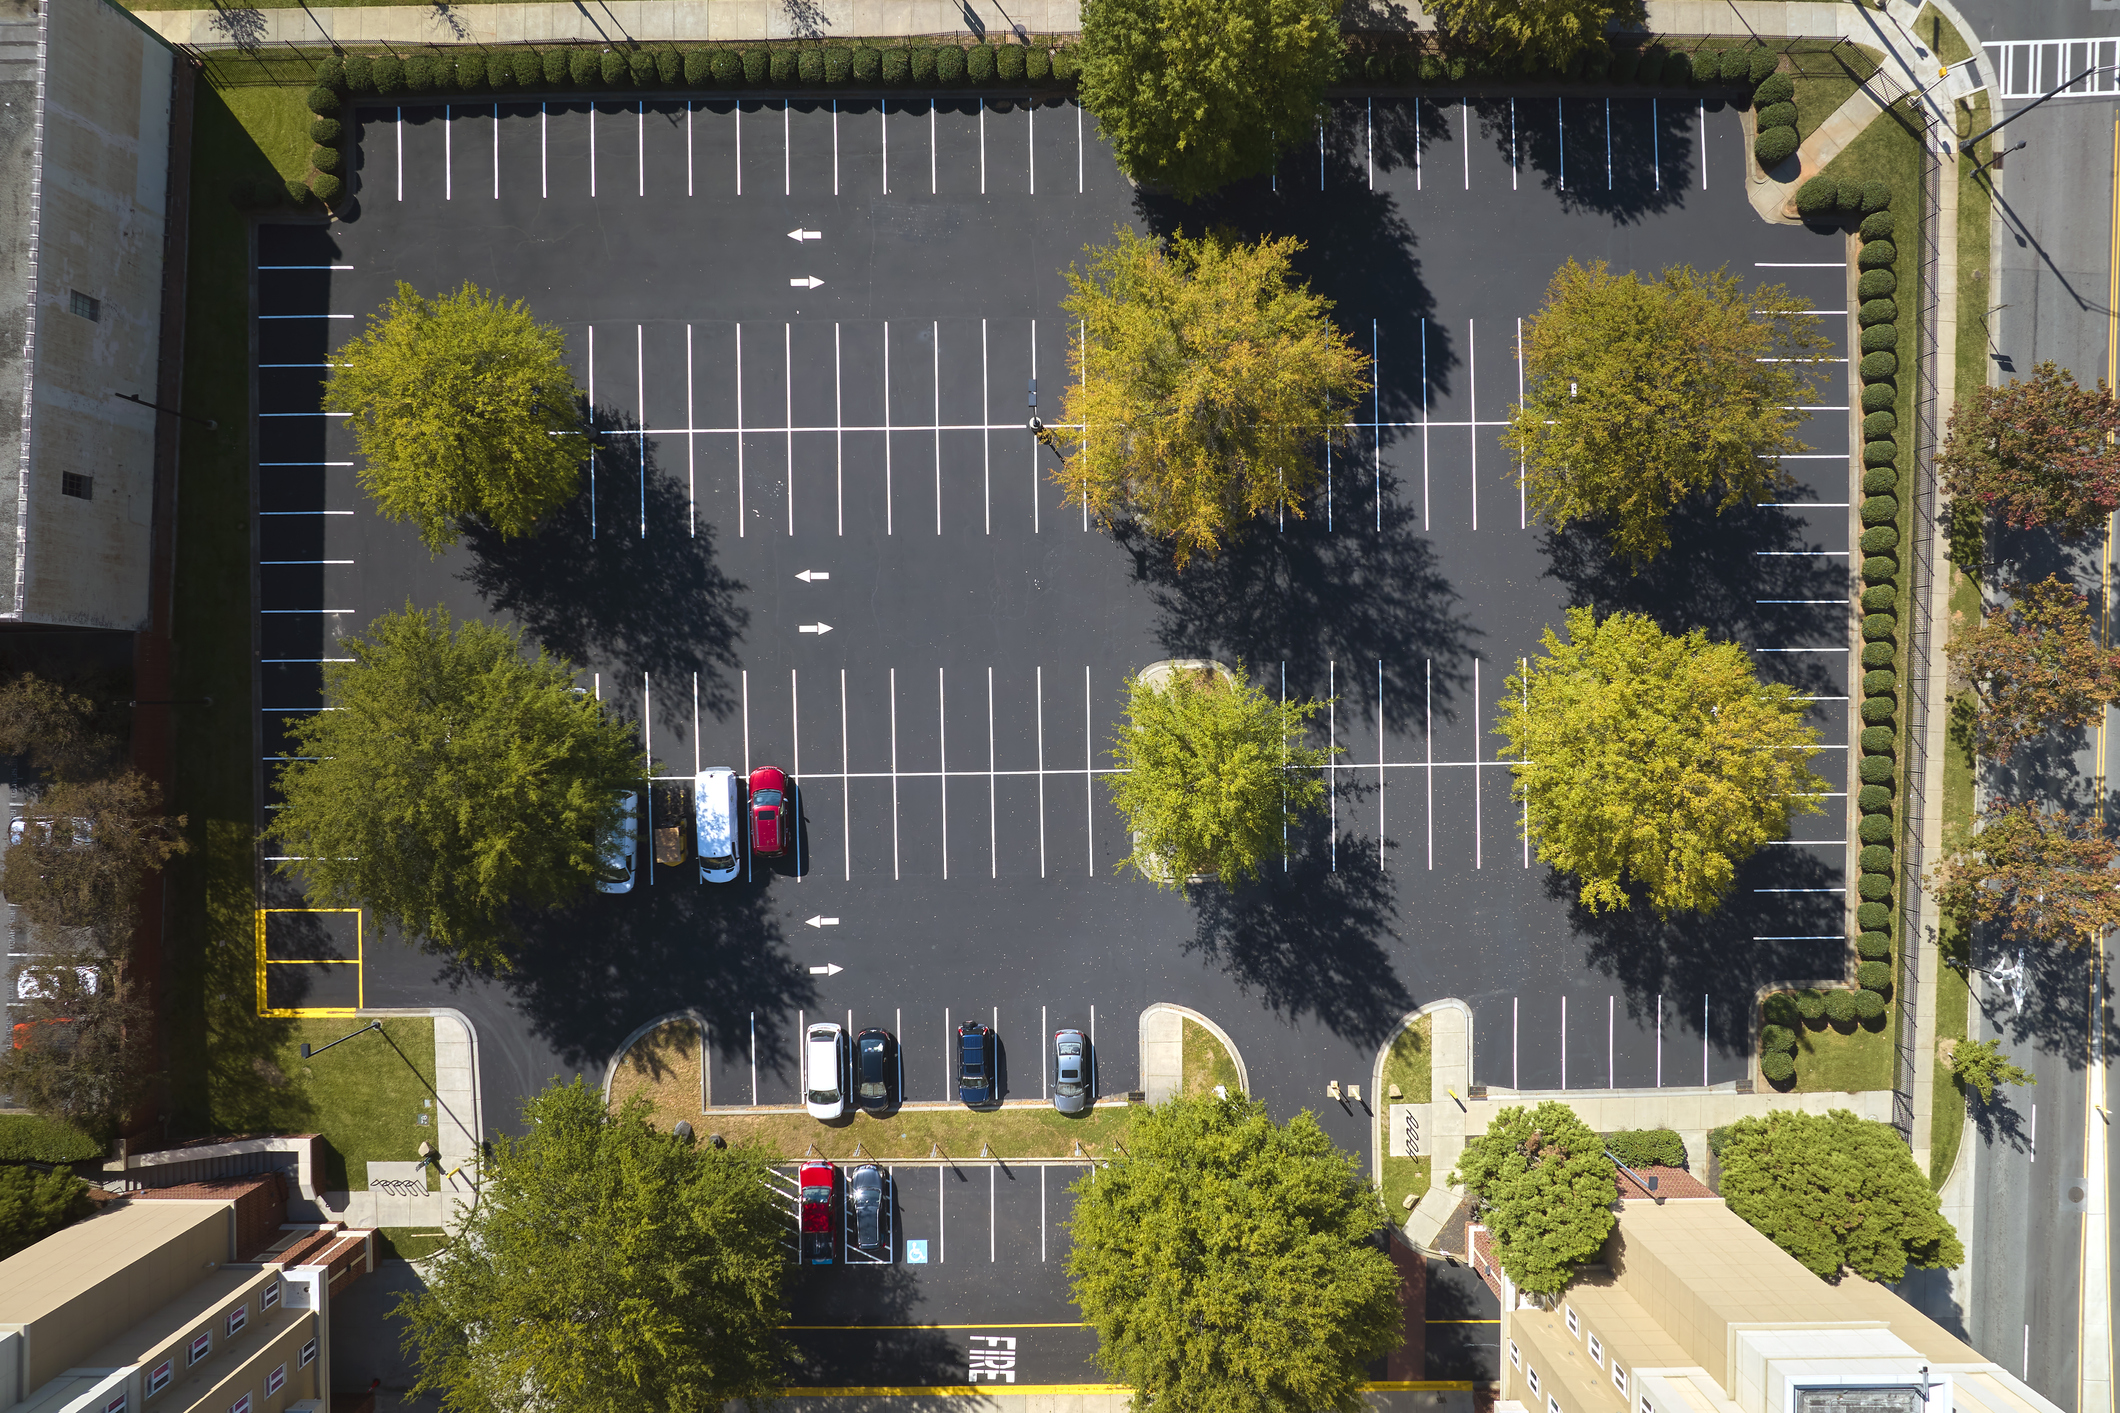 How Parking Affects Our Urban Ecosystem - Part II